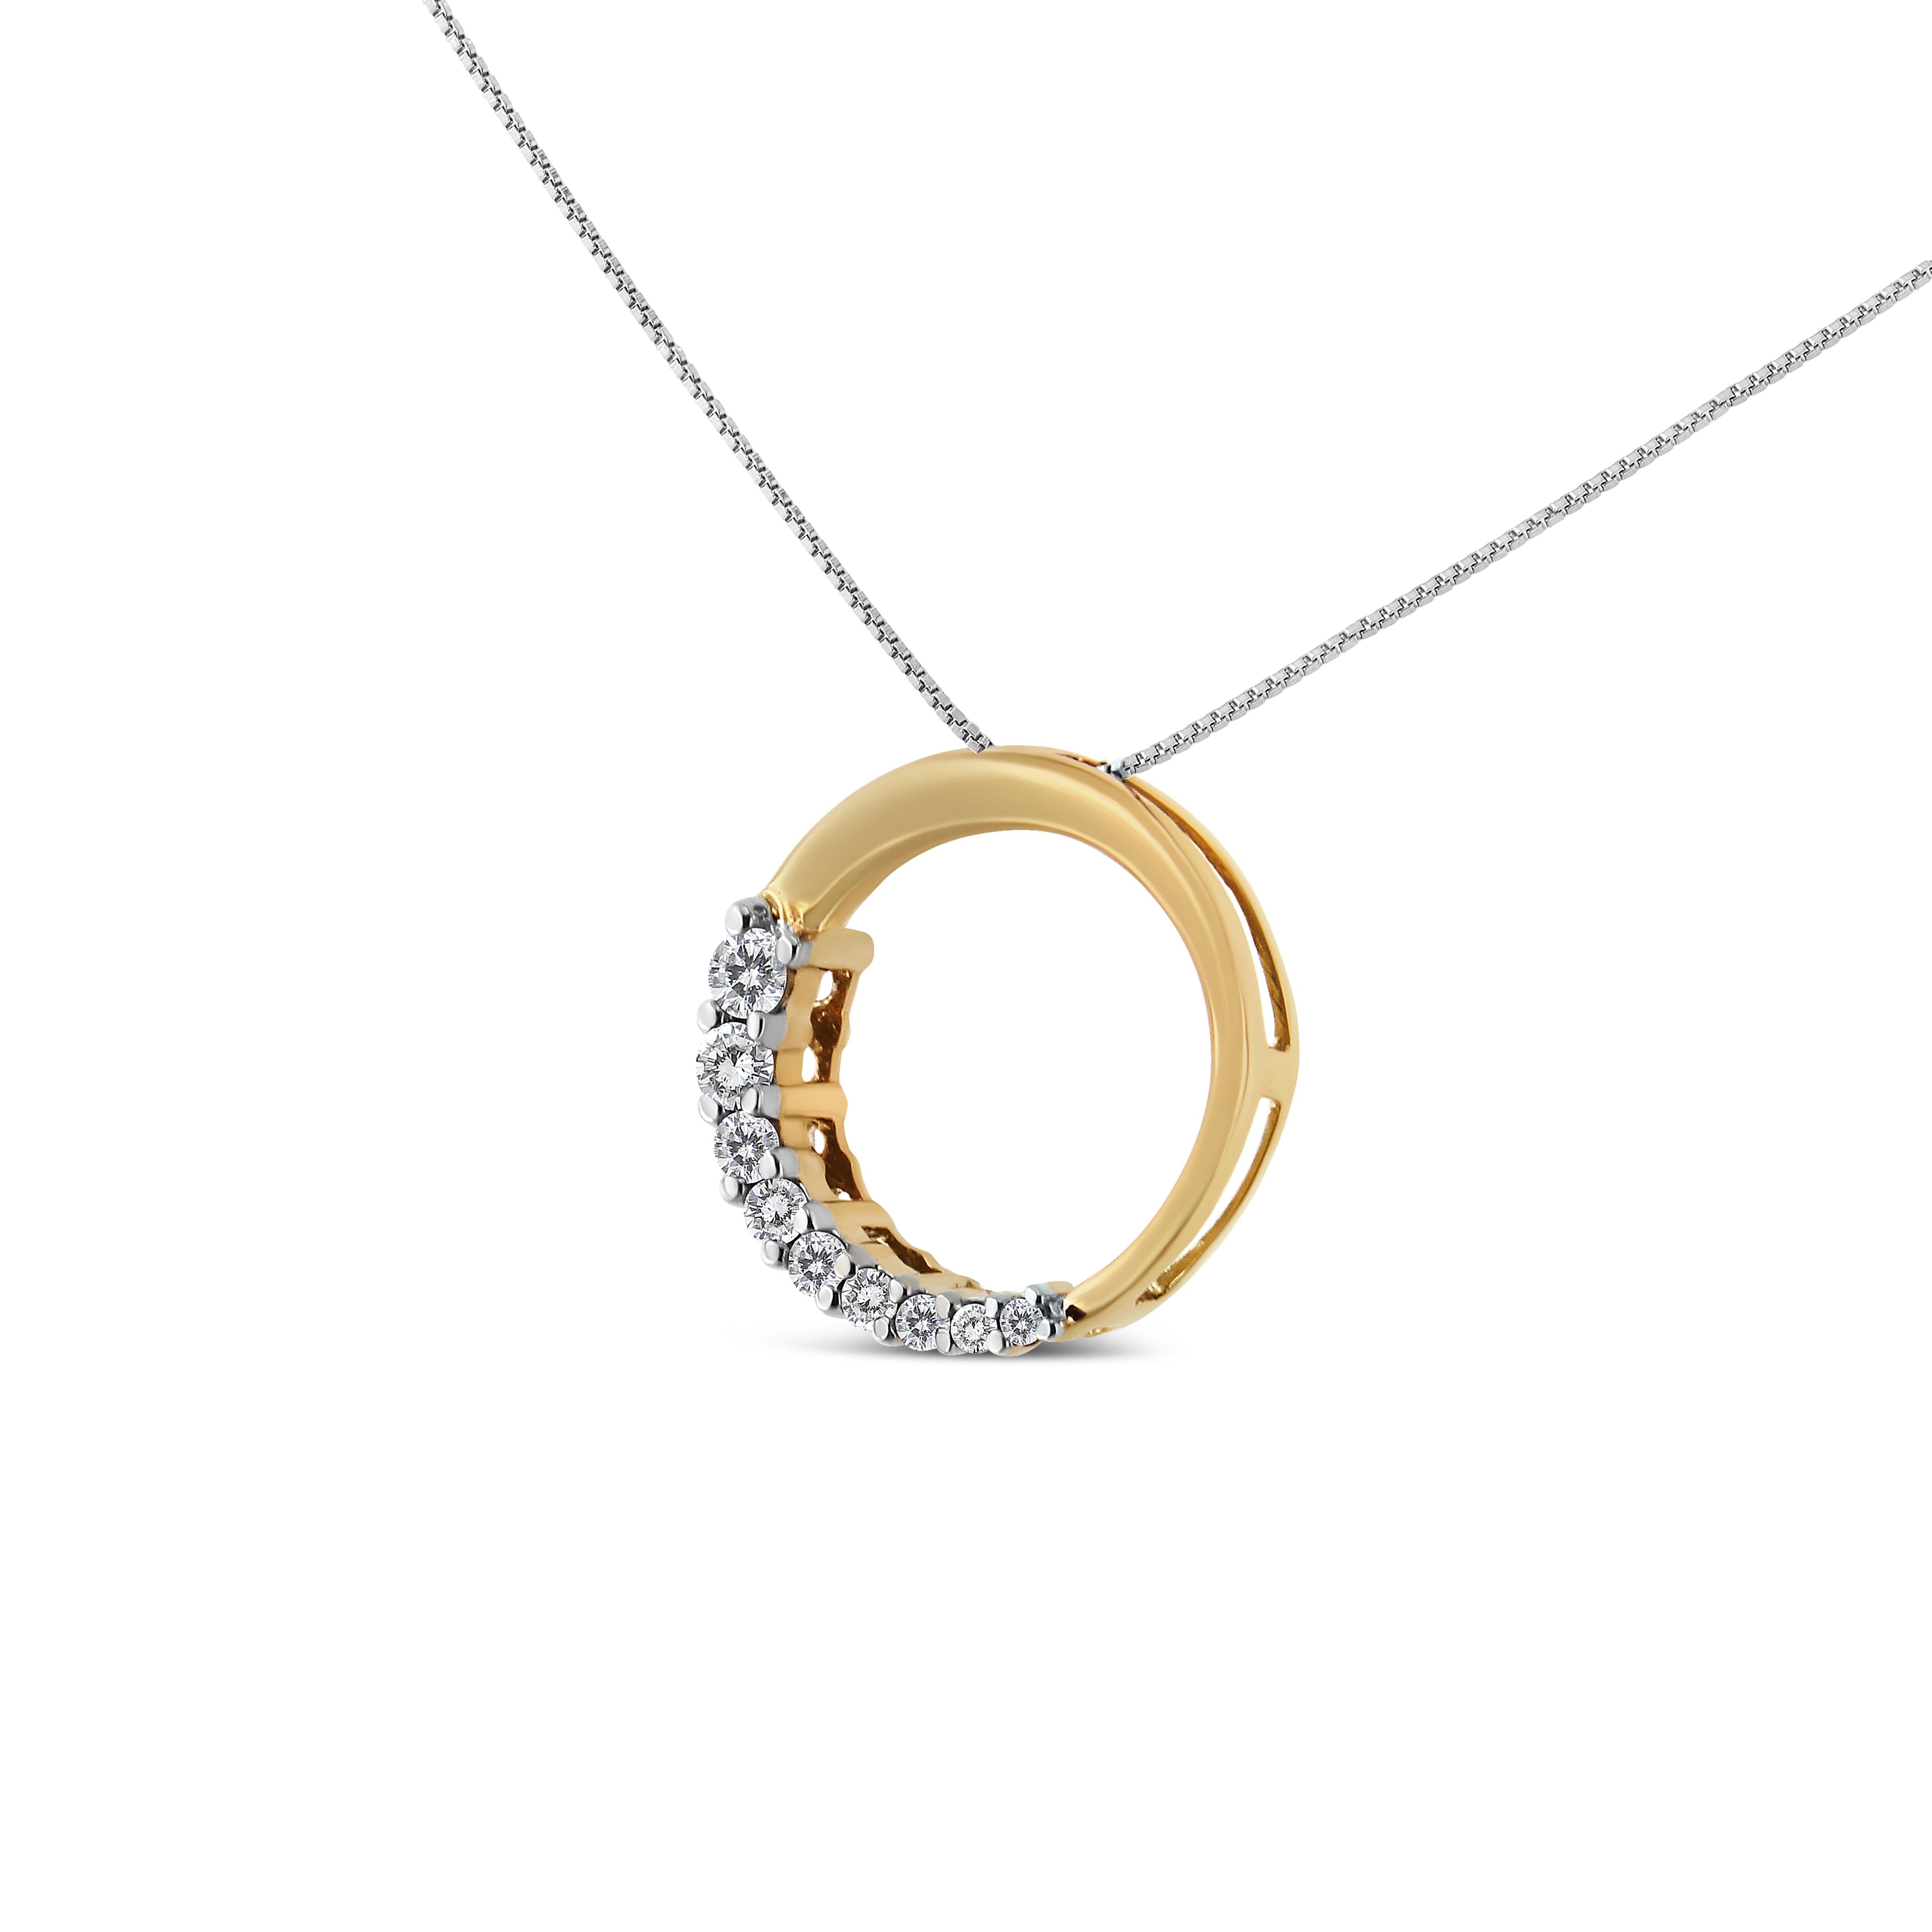 From a box chain an open circle pendant delicately dangles. Crafted in 14k yellow gold, this exquisite pendant showcases 1/4ct TDW of diamonds. Glittering round cut diamonds graduating in size sparkle on half of the open circle design. The necklace